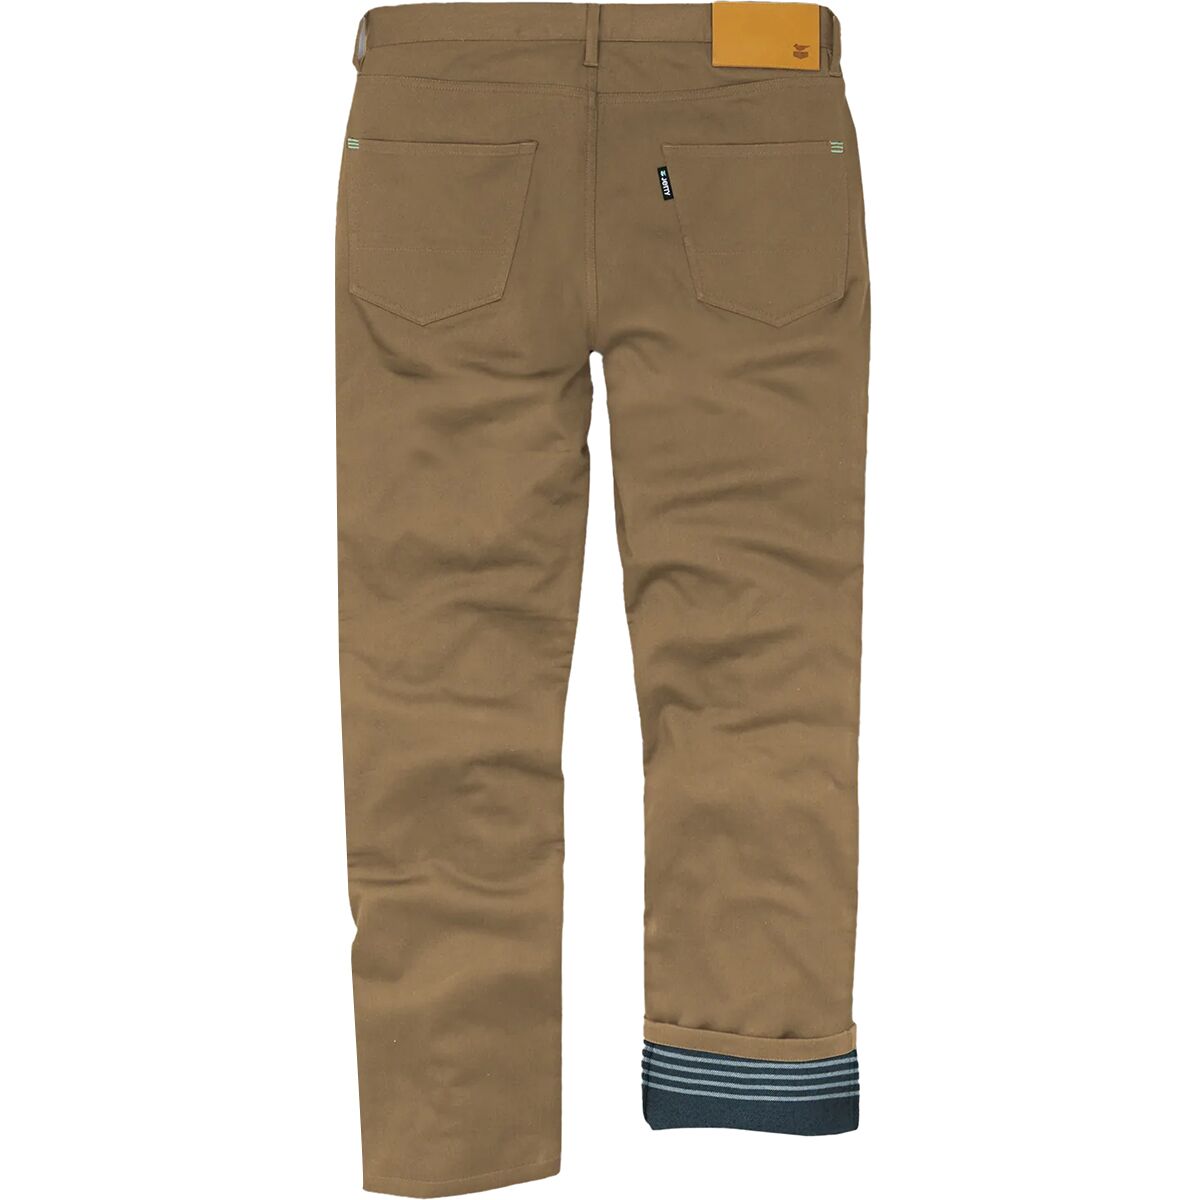 Jetty Mariner Flannel Lined Pant - Men's - Hike & Camp